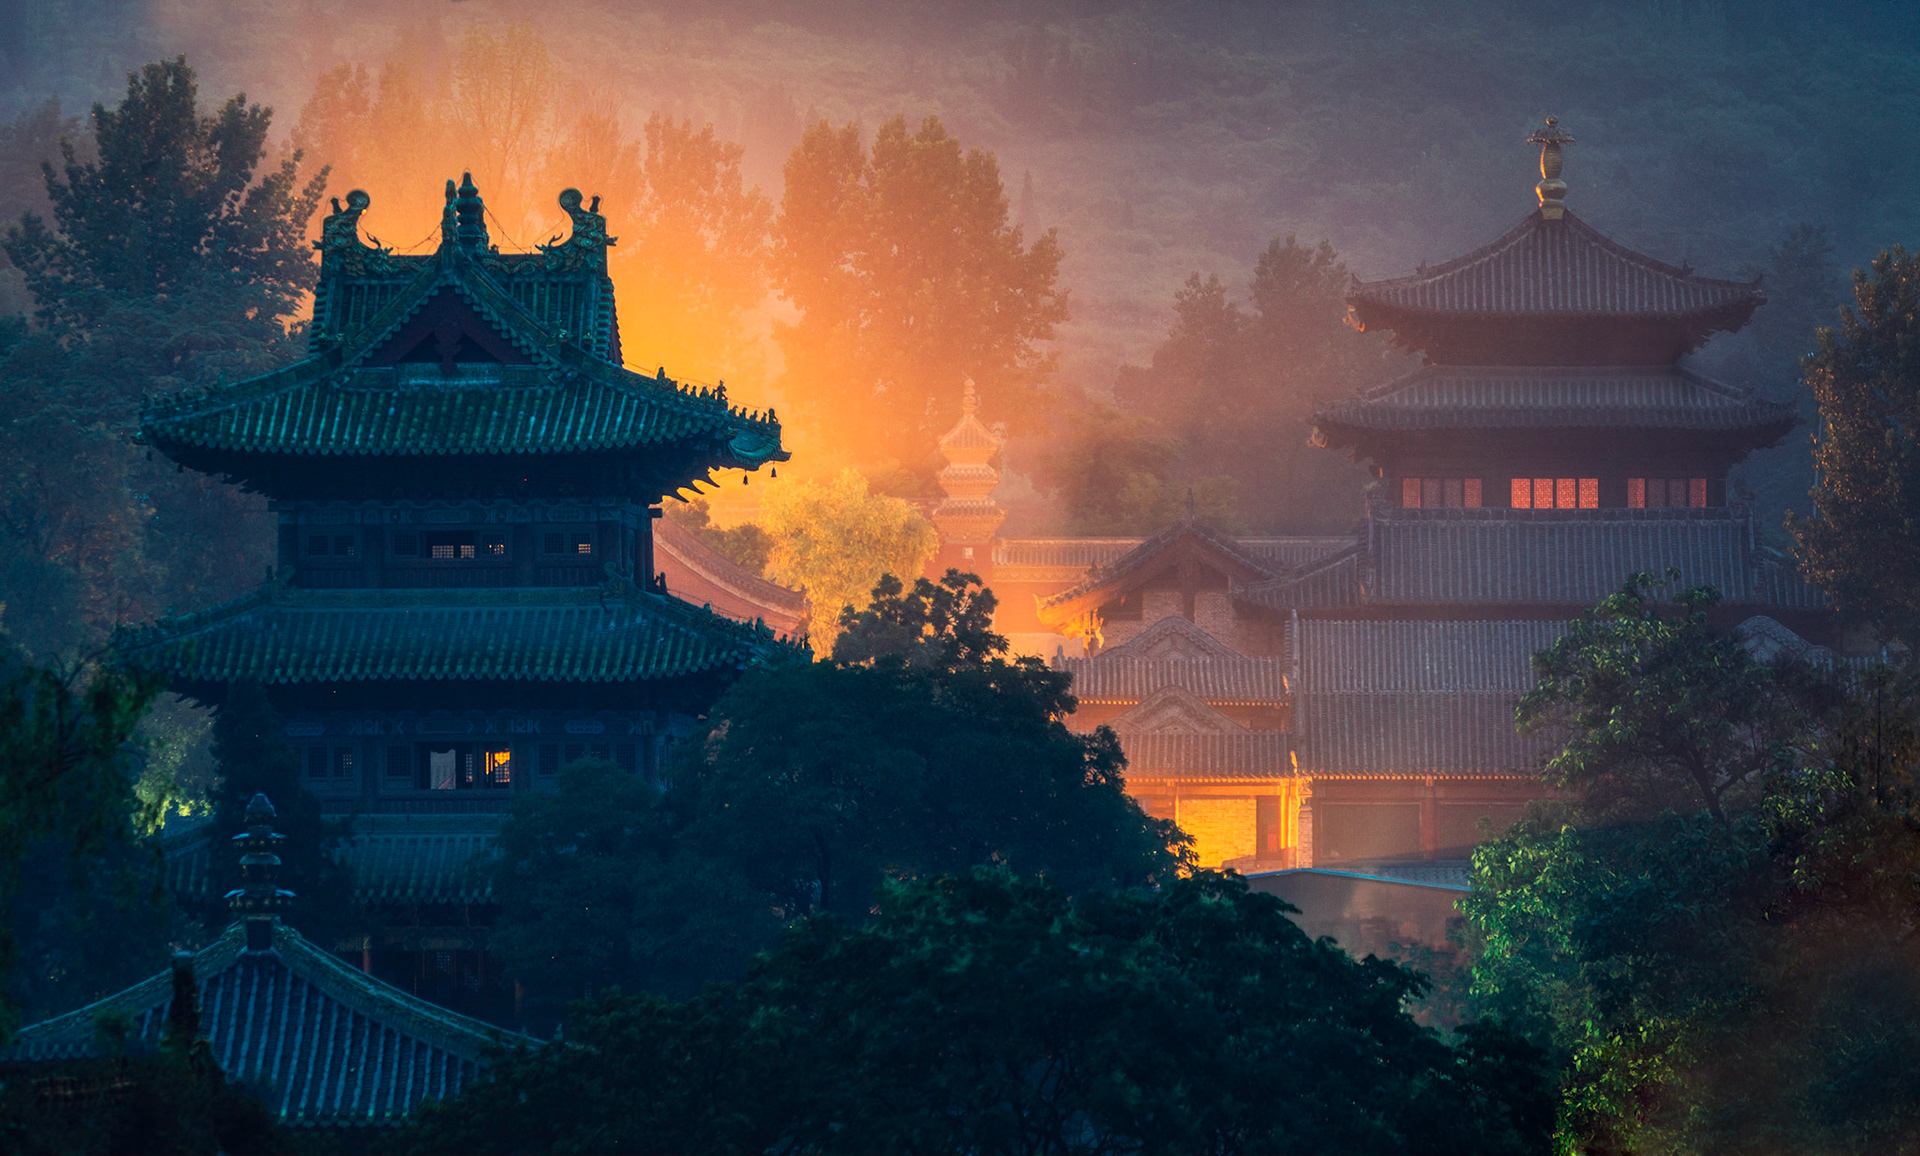 The Legendary Shaolin Temple: A Journey into the Heart of Kung Fu